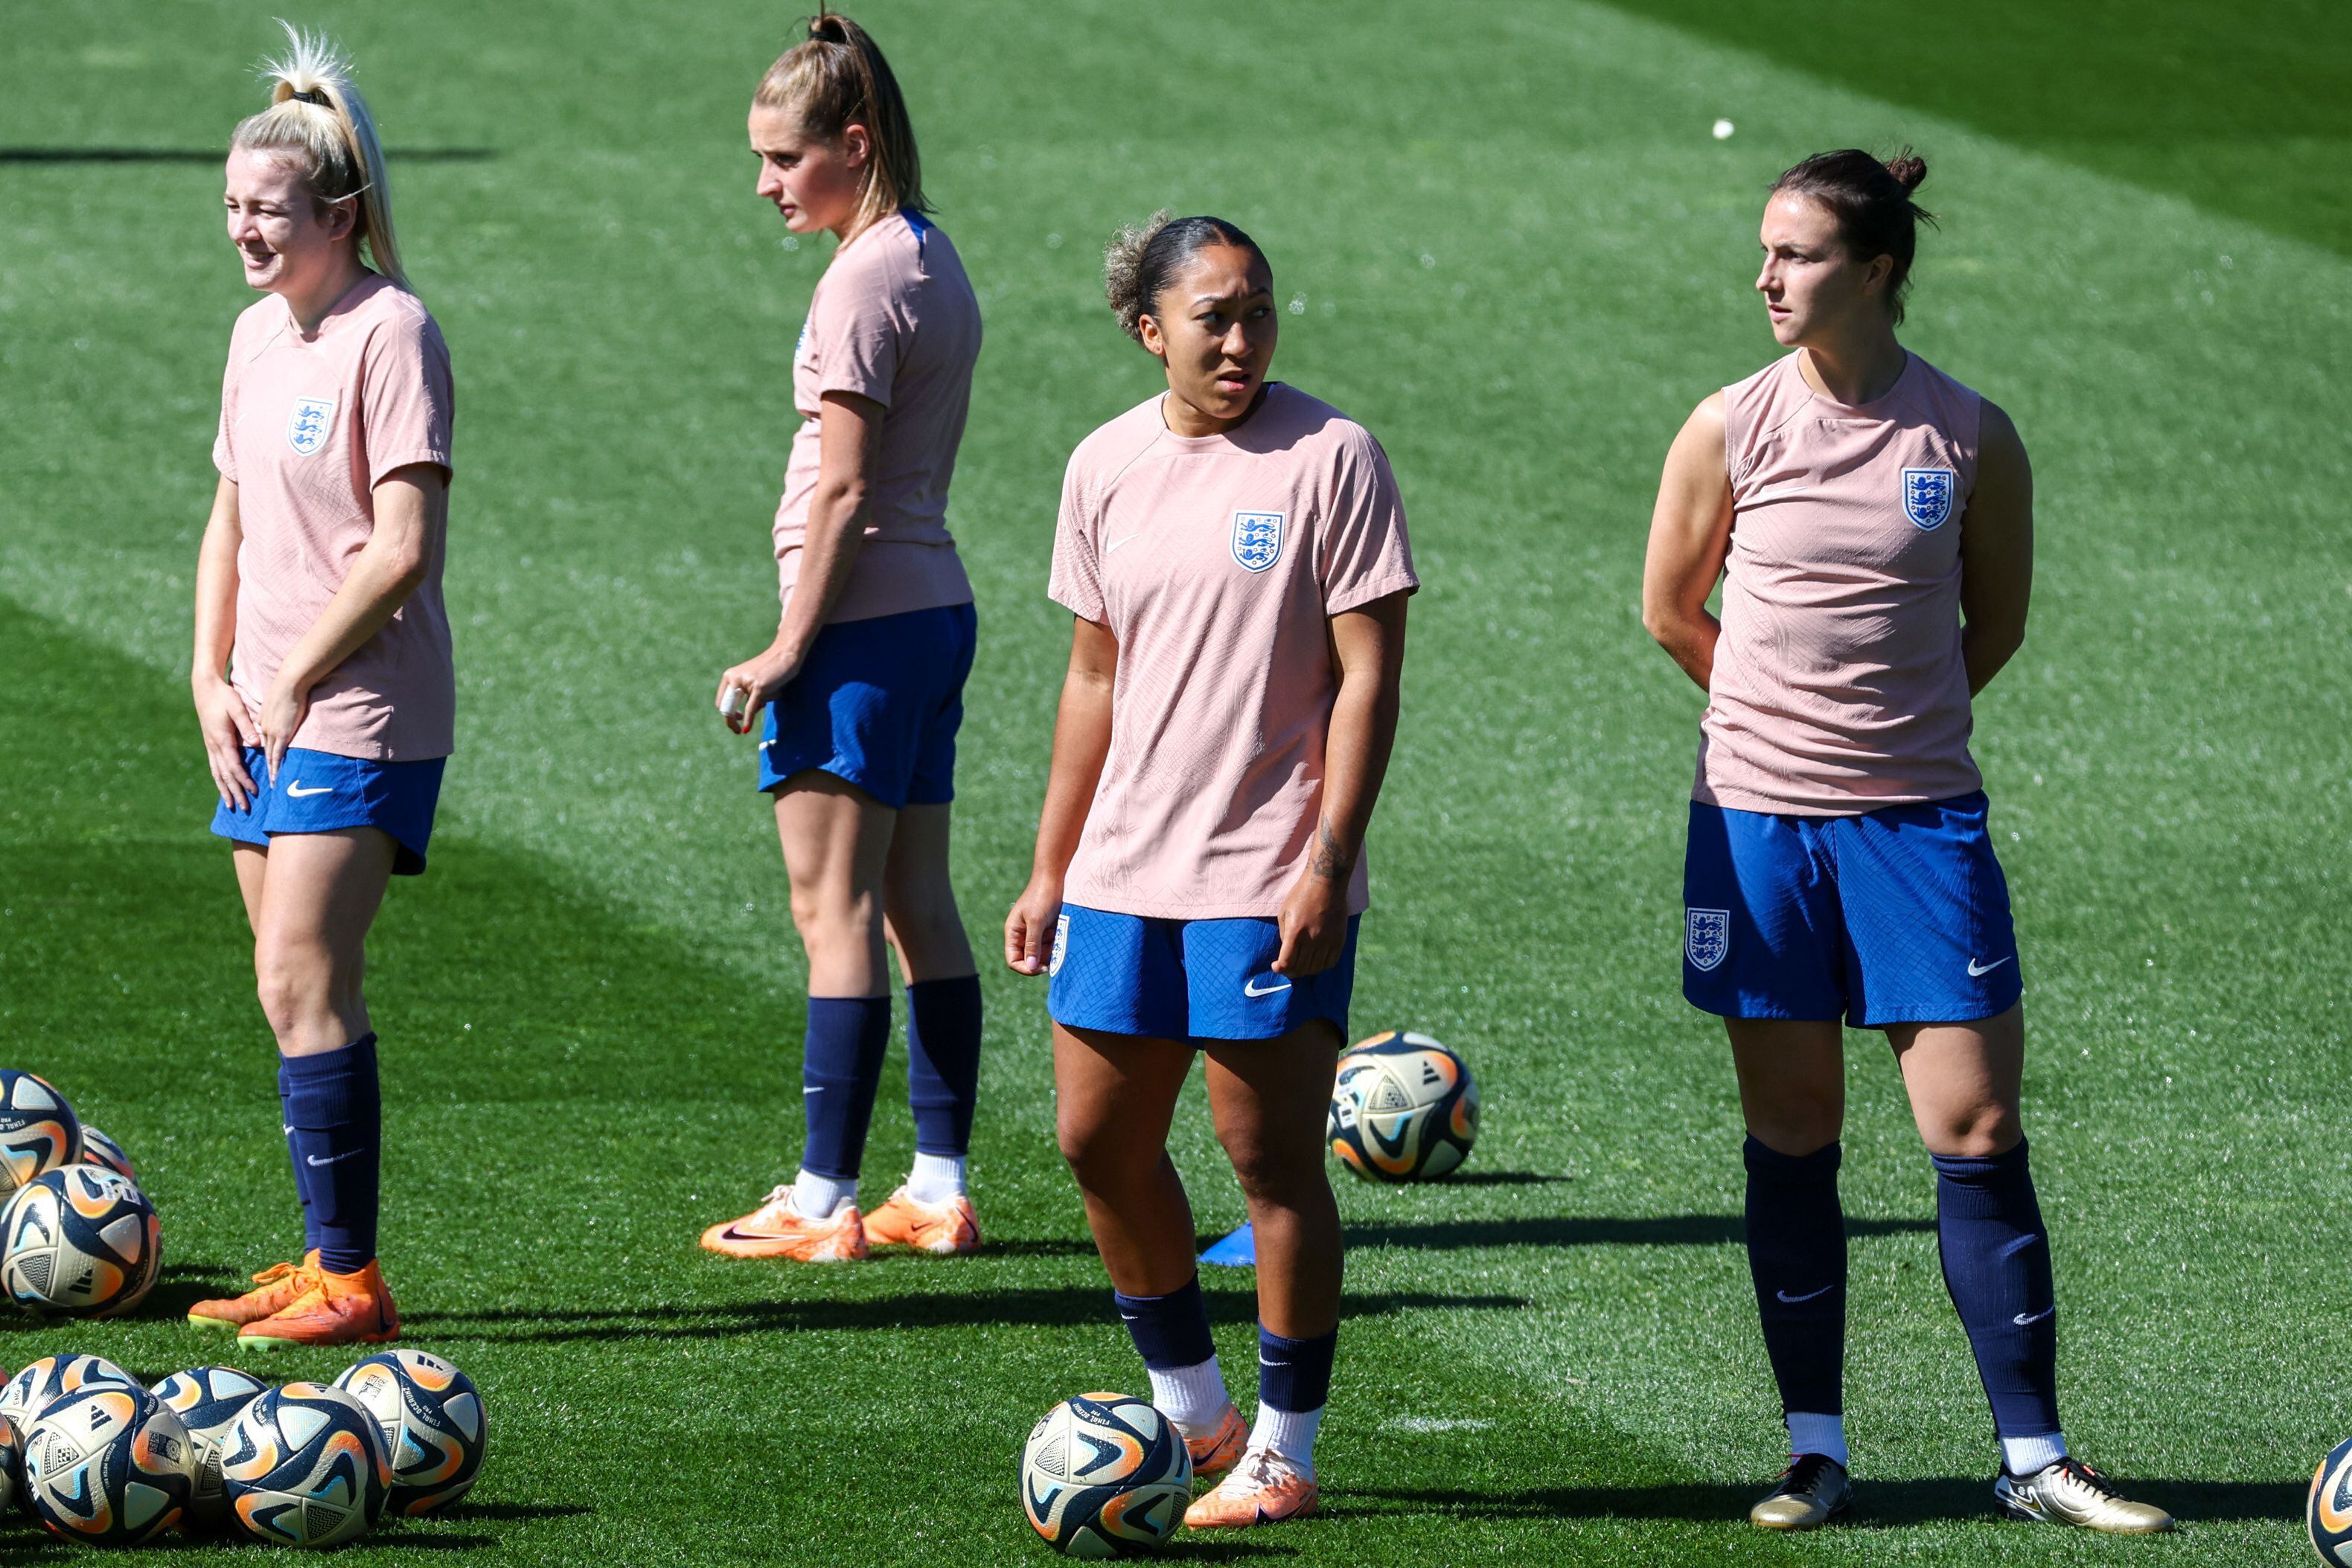 England�s Lauren James (2nd R) takes part in a training session with teammates at Central Coast Stadium in Gosford on August 19, 2023, on the eve of the Women�s World Cup football final match between Spain and England. (Photo by DAVID GRAY / AFP)